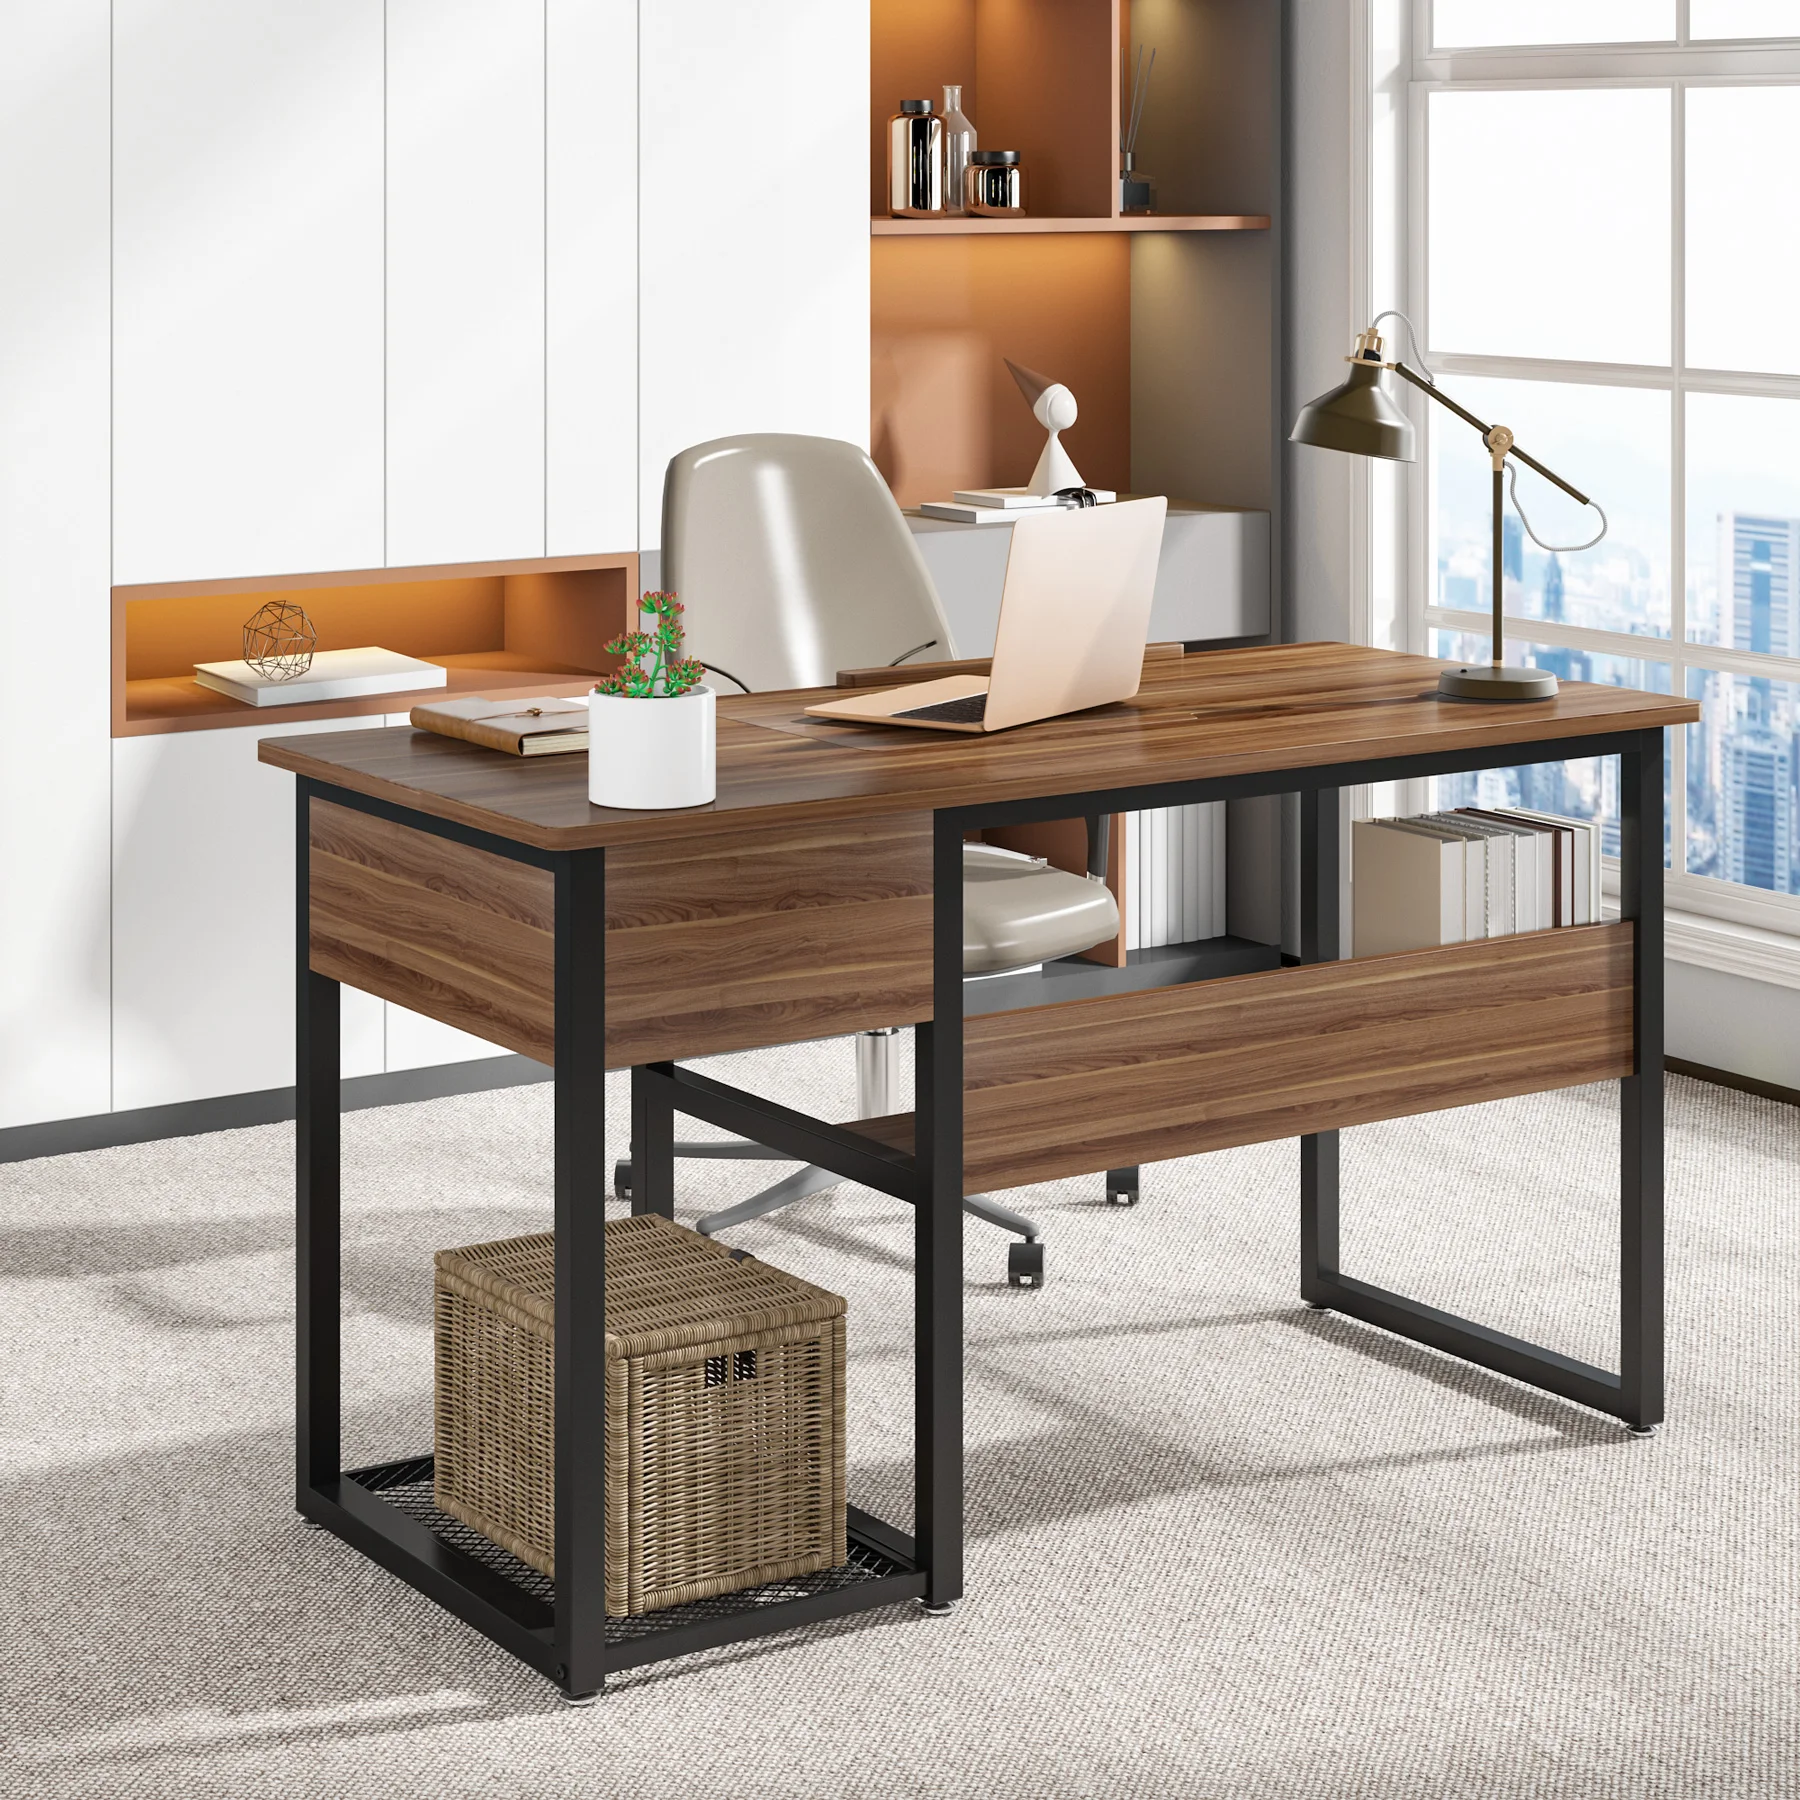 Modern Simple PC Drawing Desk Brown Study Writing Table Computer Home Office Desk with Drawers